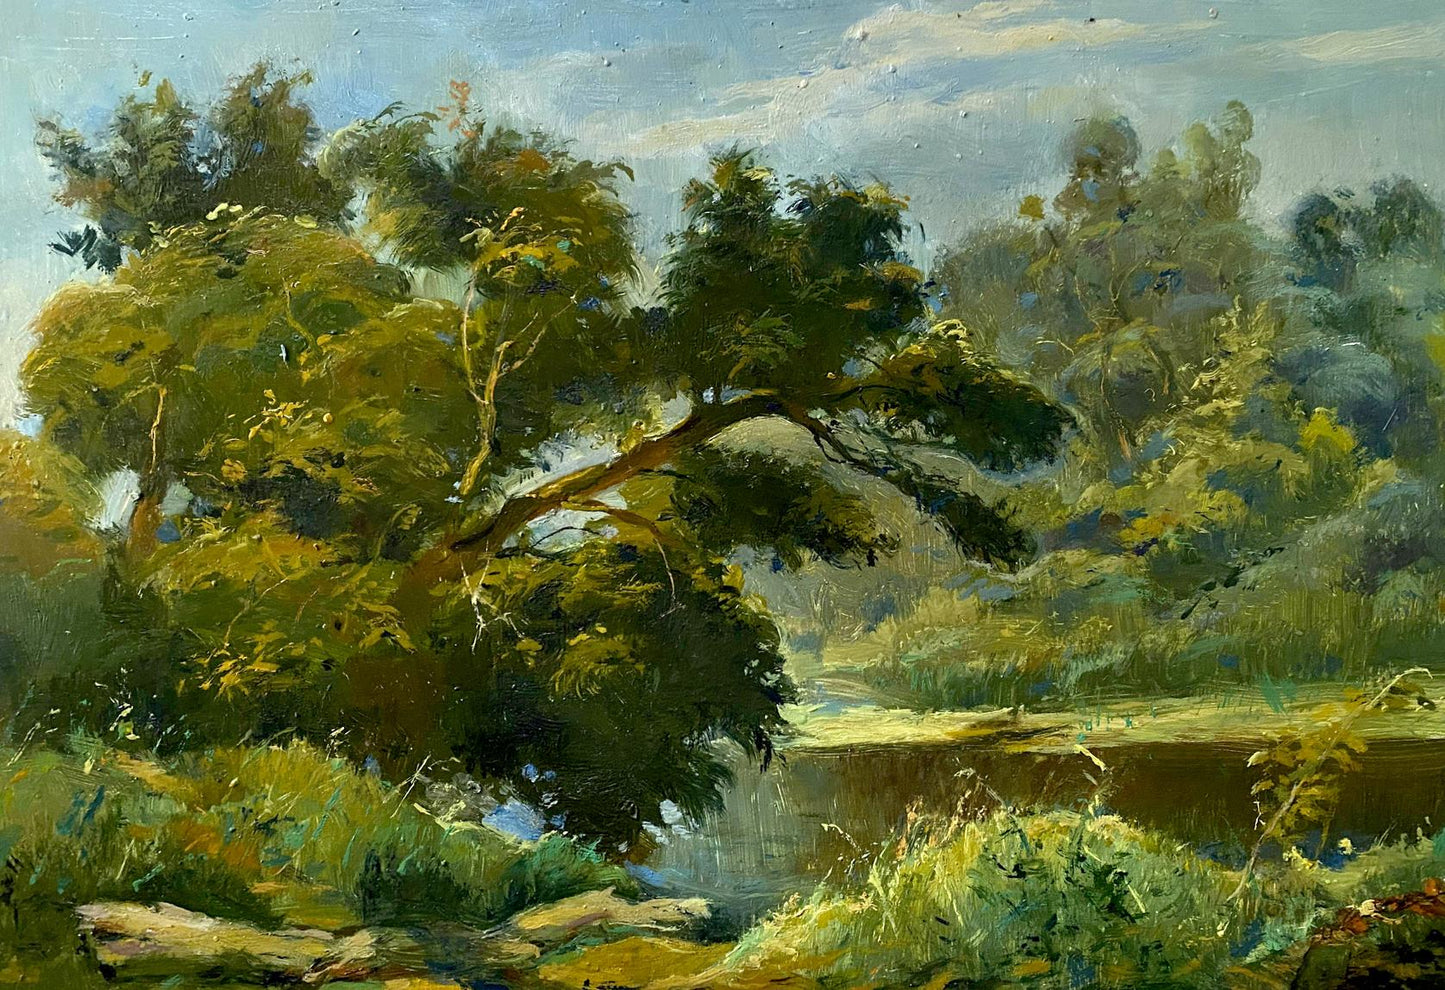 Oil painting Suli river buy